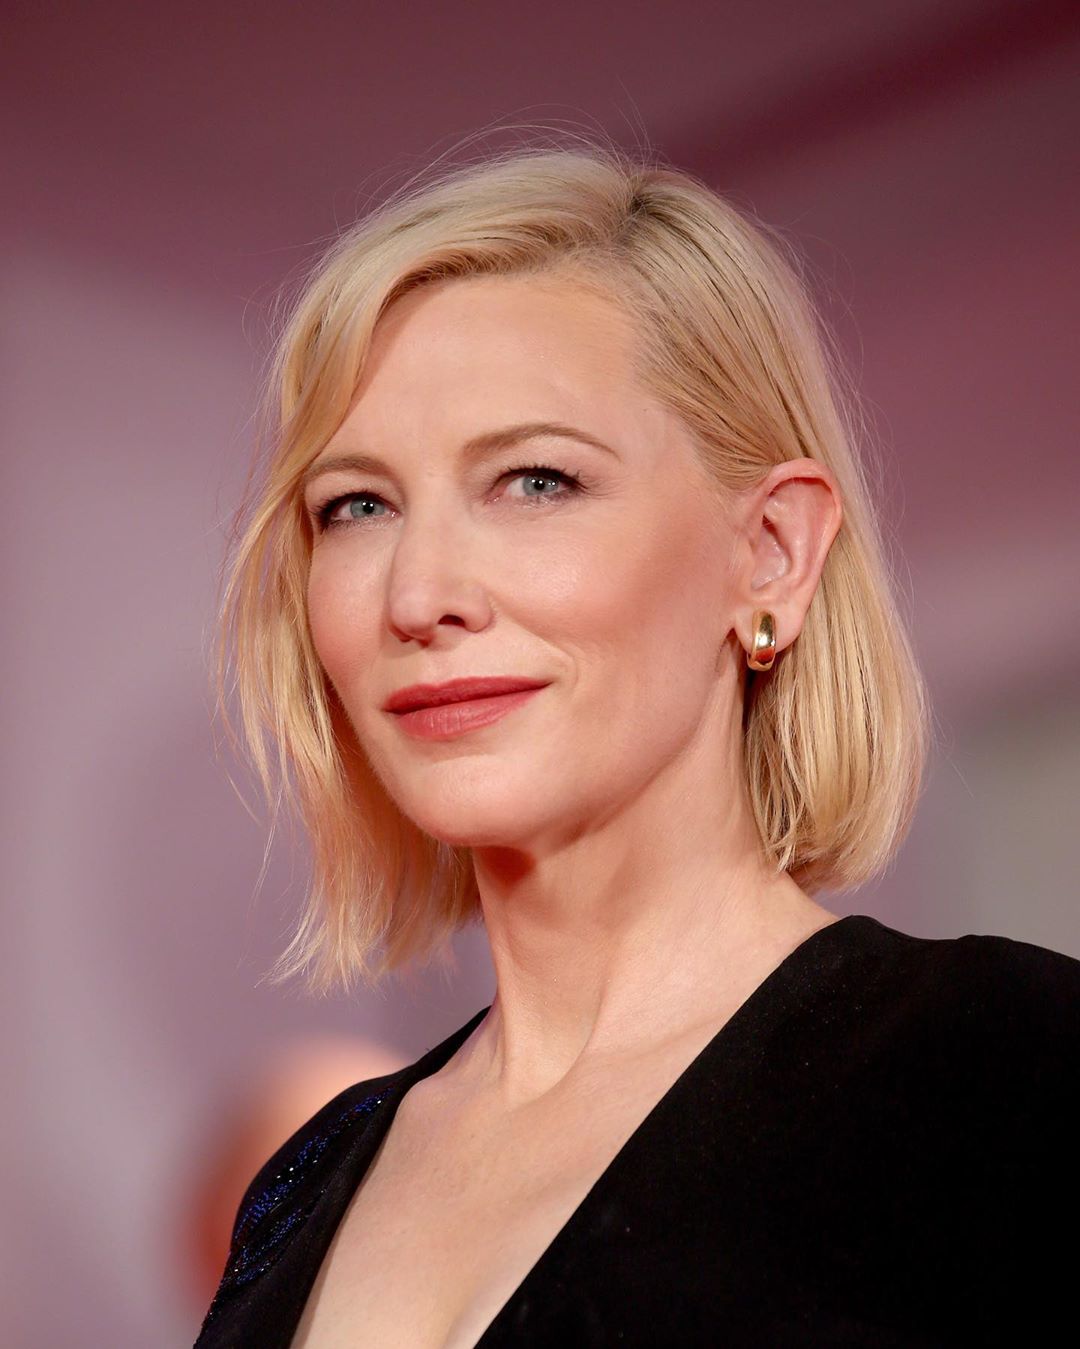 Armani beauty - Last night on the red carpet. Giorgio Armani Global Beauty Ambassador and jury president of the 77th Venice Film Festival, Cate Blanchett, wore ROUGE D'ARMANI MATTE in glamorous shade...